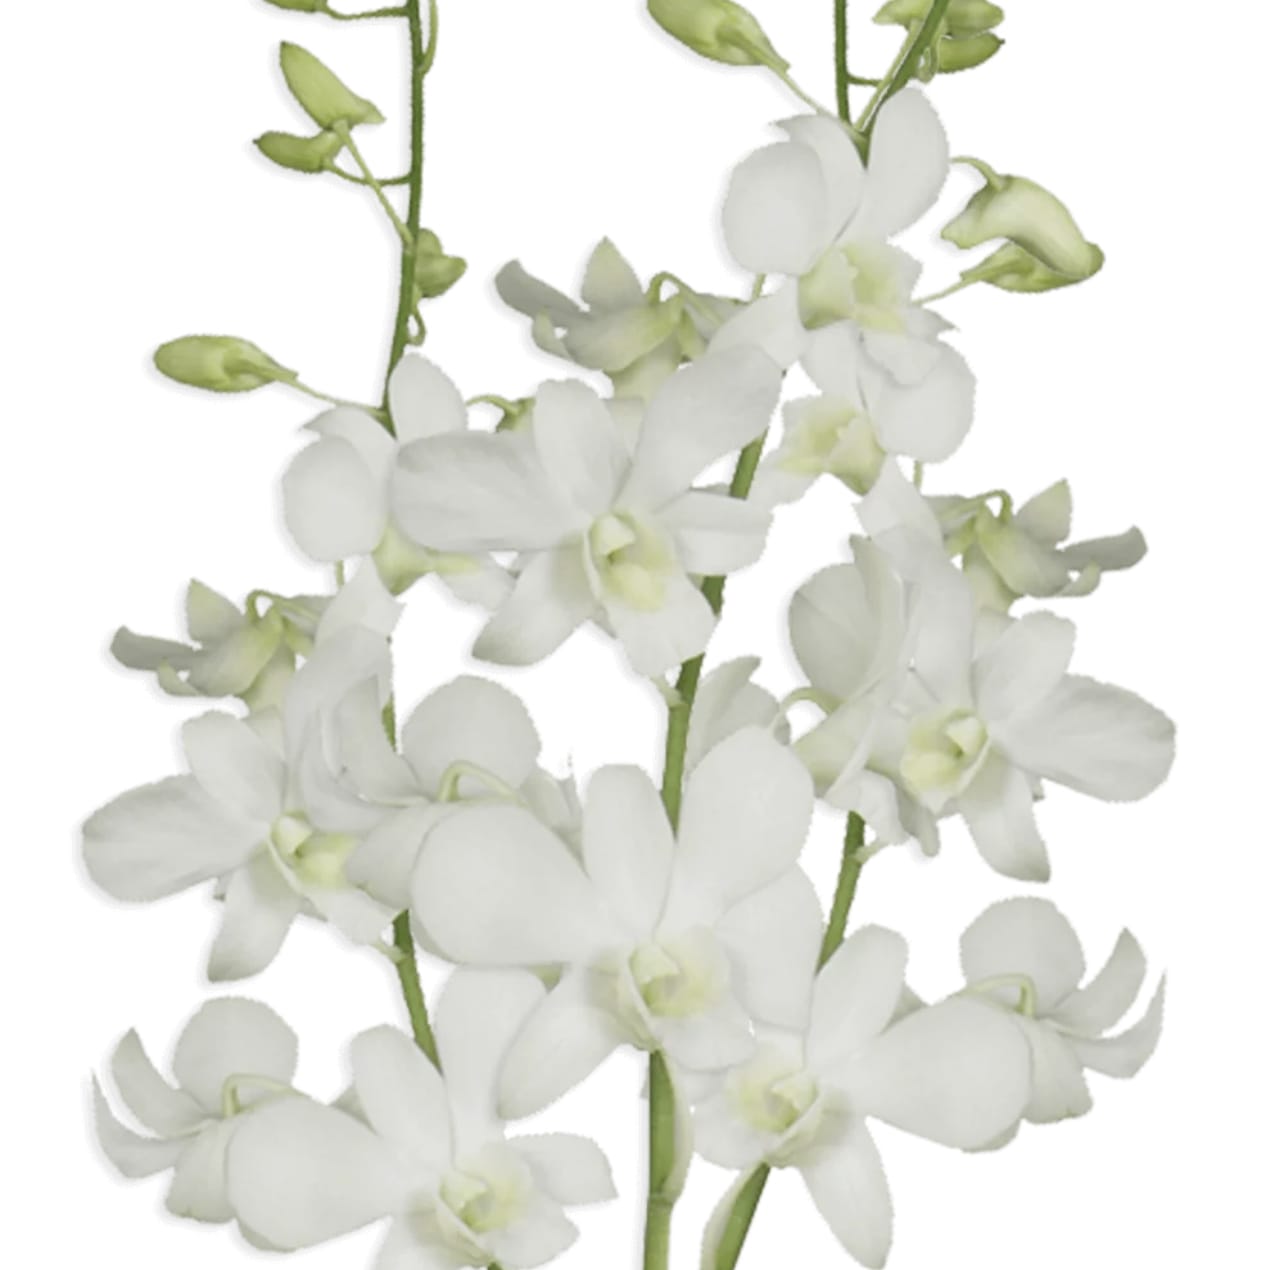 White Dendrobium Orchid - Dendrobium contains 10 stems per bunch Please read the following instructions before placing your order.  Bulk flower orders placed through our online site must be placed two days in advance from the desire pick up date, that will give us enough time to get it ready for you in case we do not have the item available in store. To check availability of the item you could contact our location in Tustin for more information. If you place the order with no anticipation time your order must be canceled.  155 W. First St. Tustin, CA. 92780 (714) 368-9845  Mon-Fri 8 a.m. - 6 p.m. Saturday 8 a.m - 5 p.m. Sunday 10 a.m. - 2 p.m.